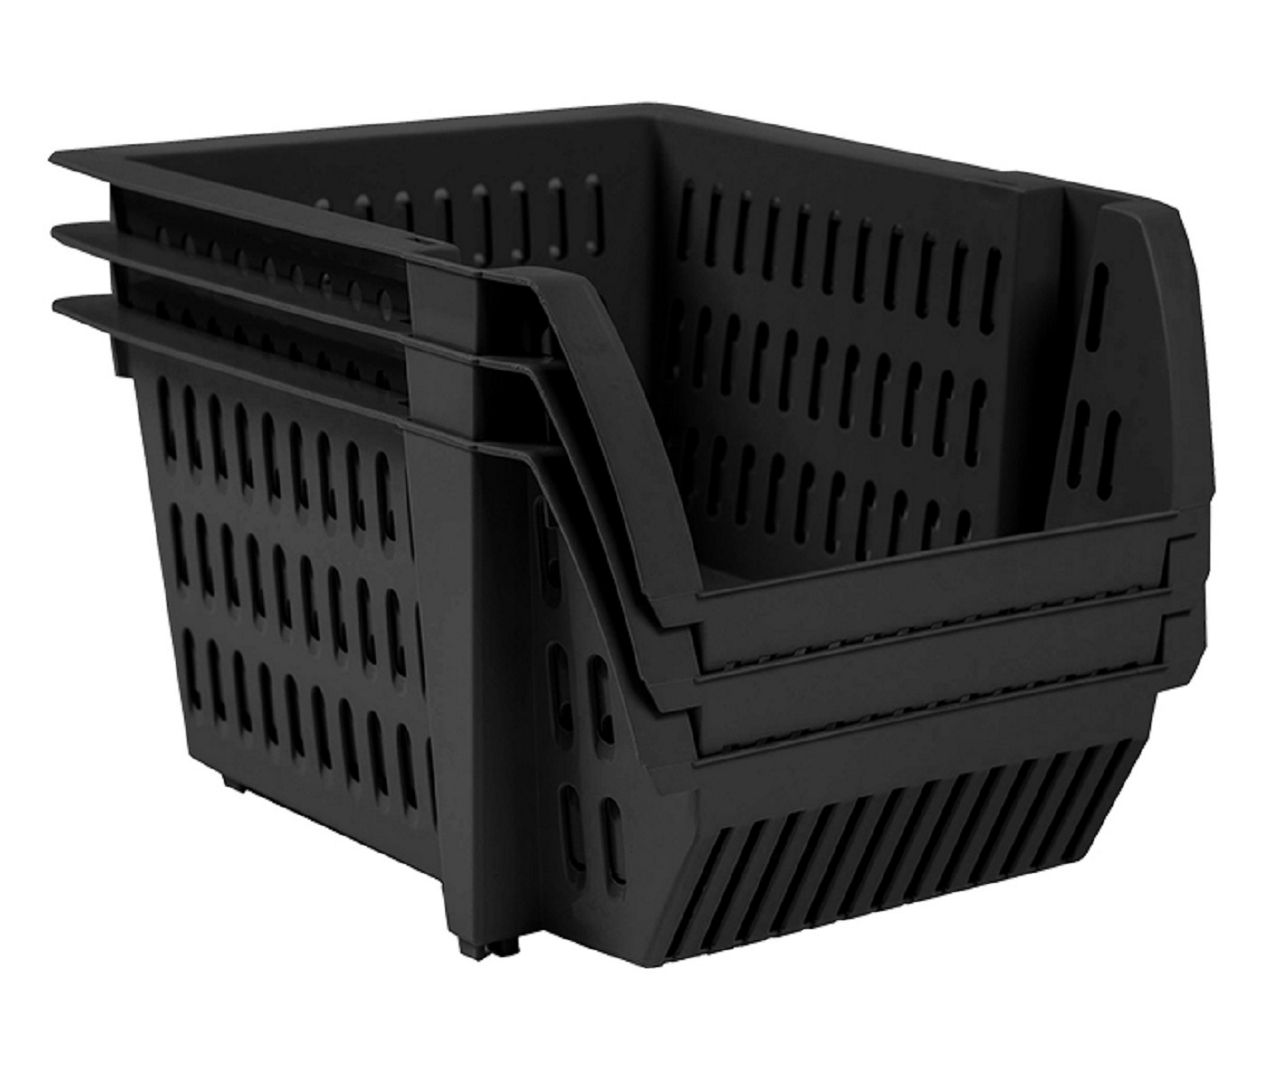 Upright Storage Baskets & Storage Containers at